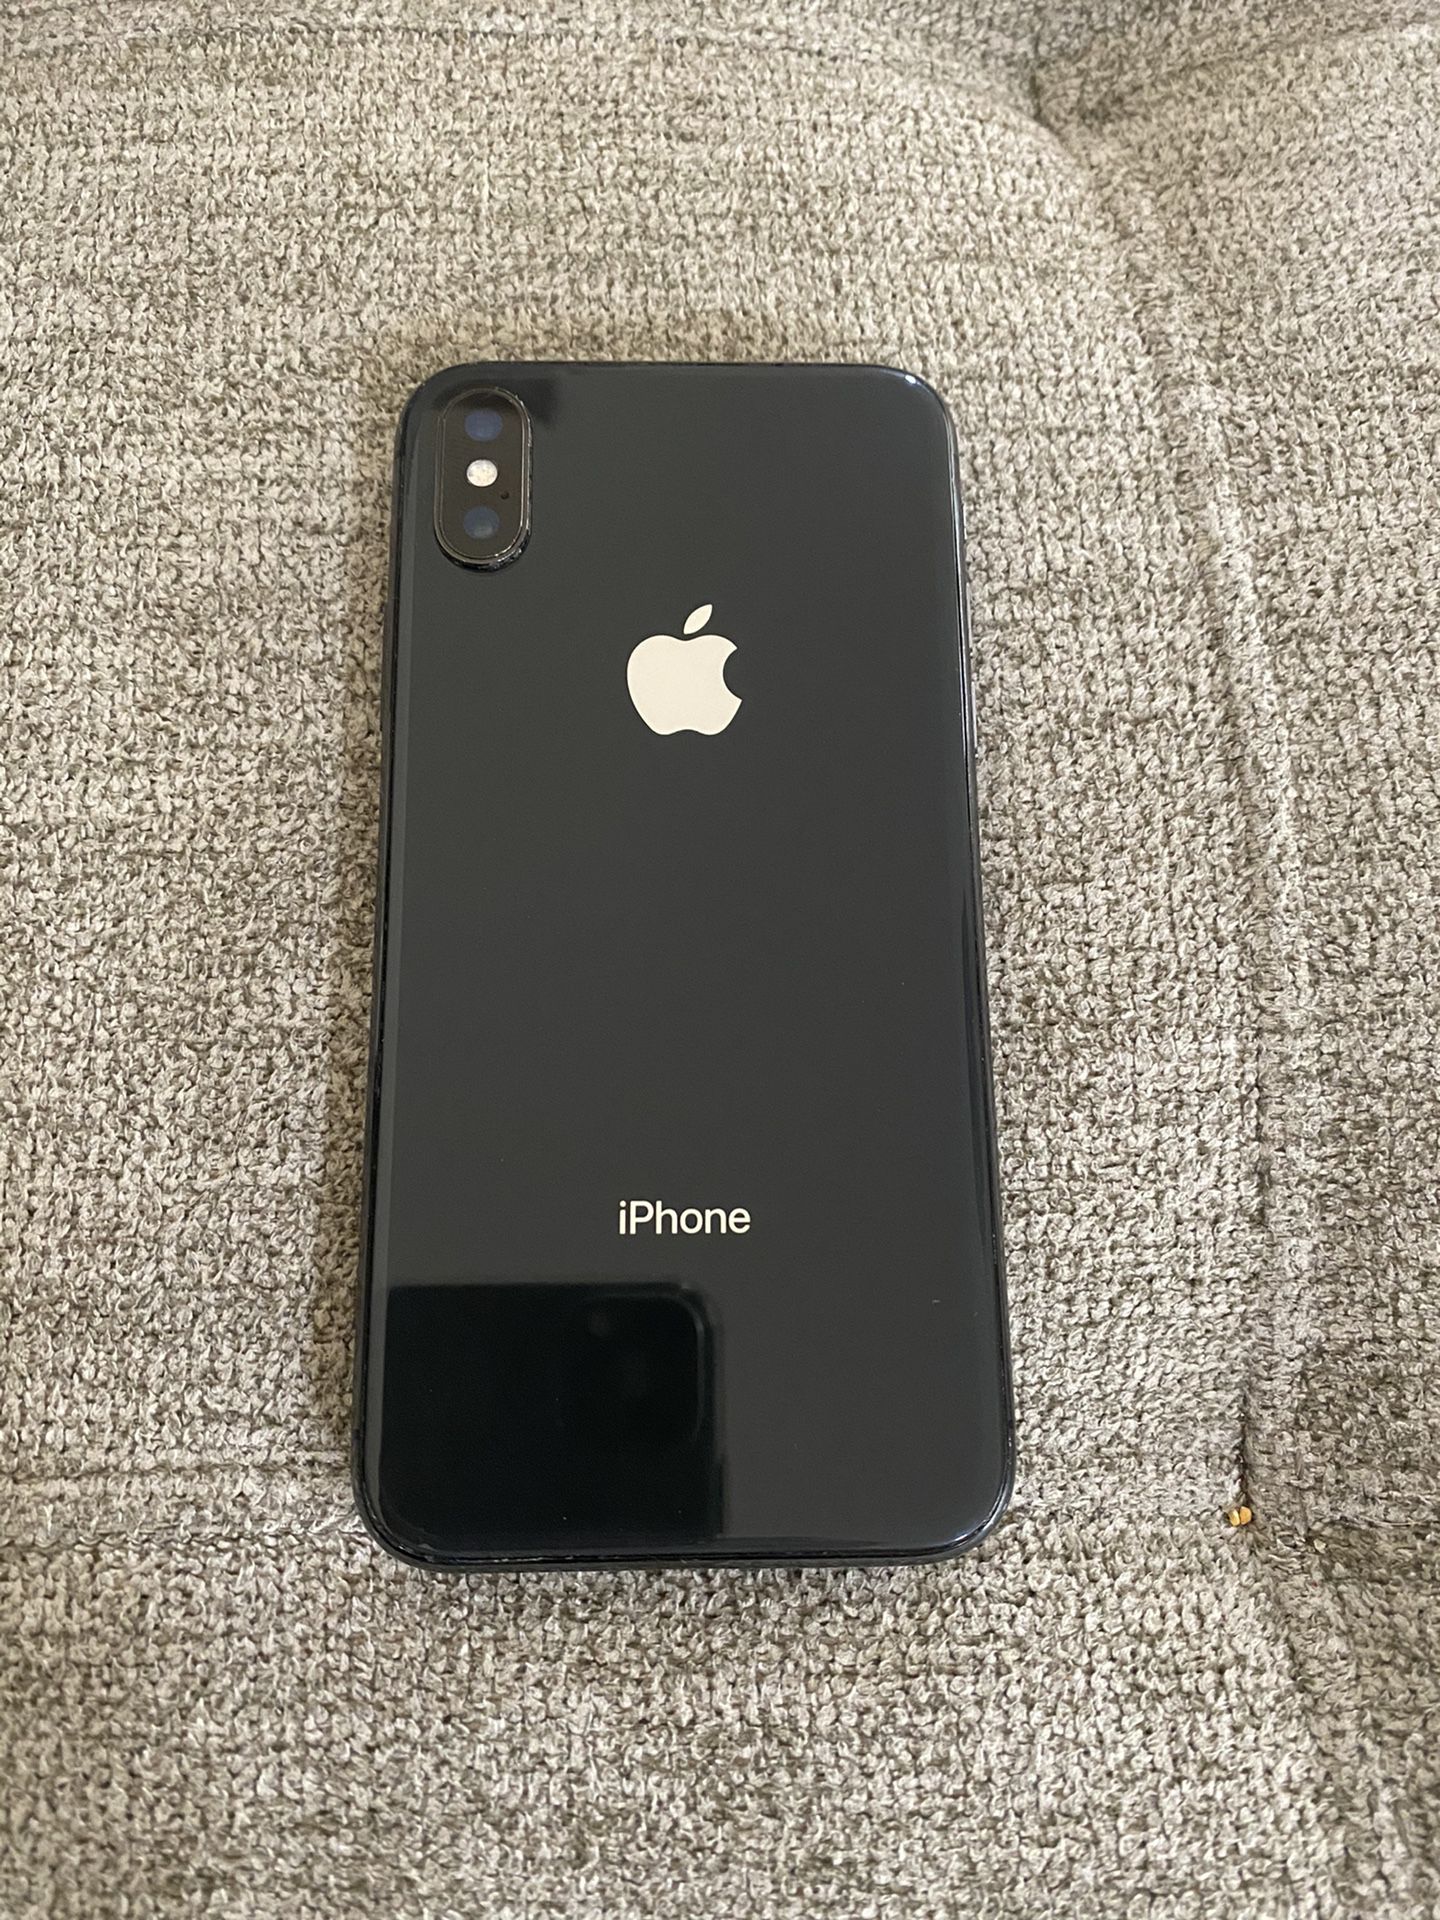 iPhone X 256 GB Space Gray Unlocked for any carrier!